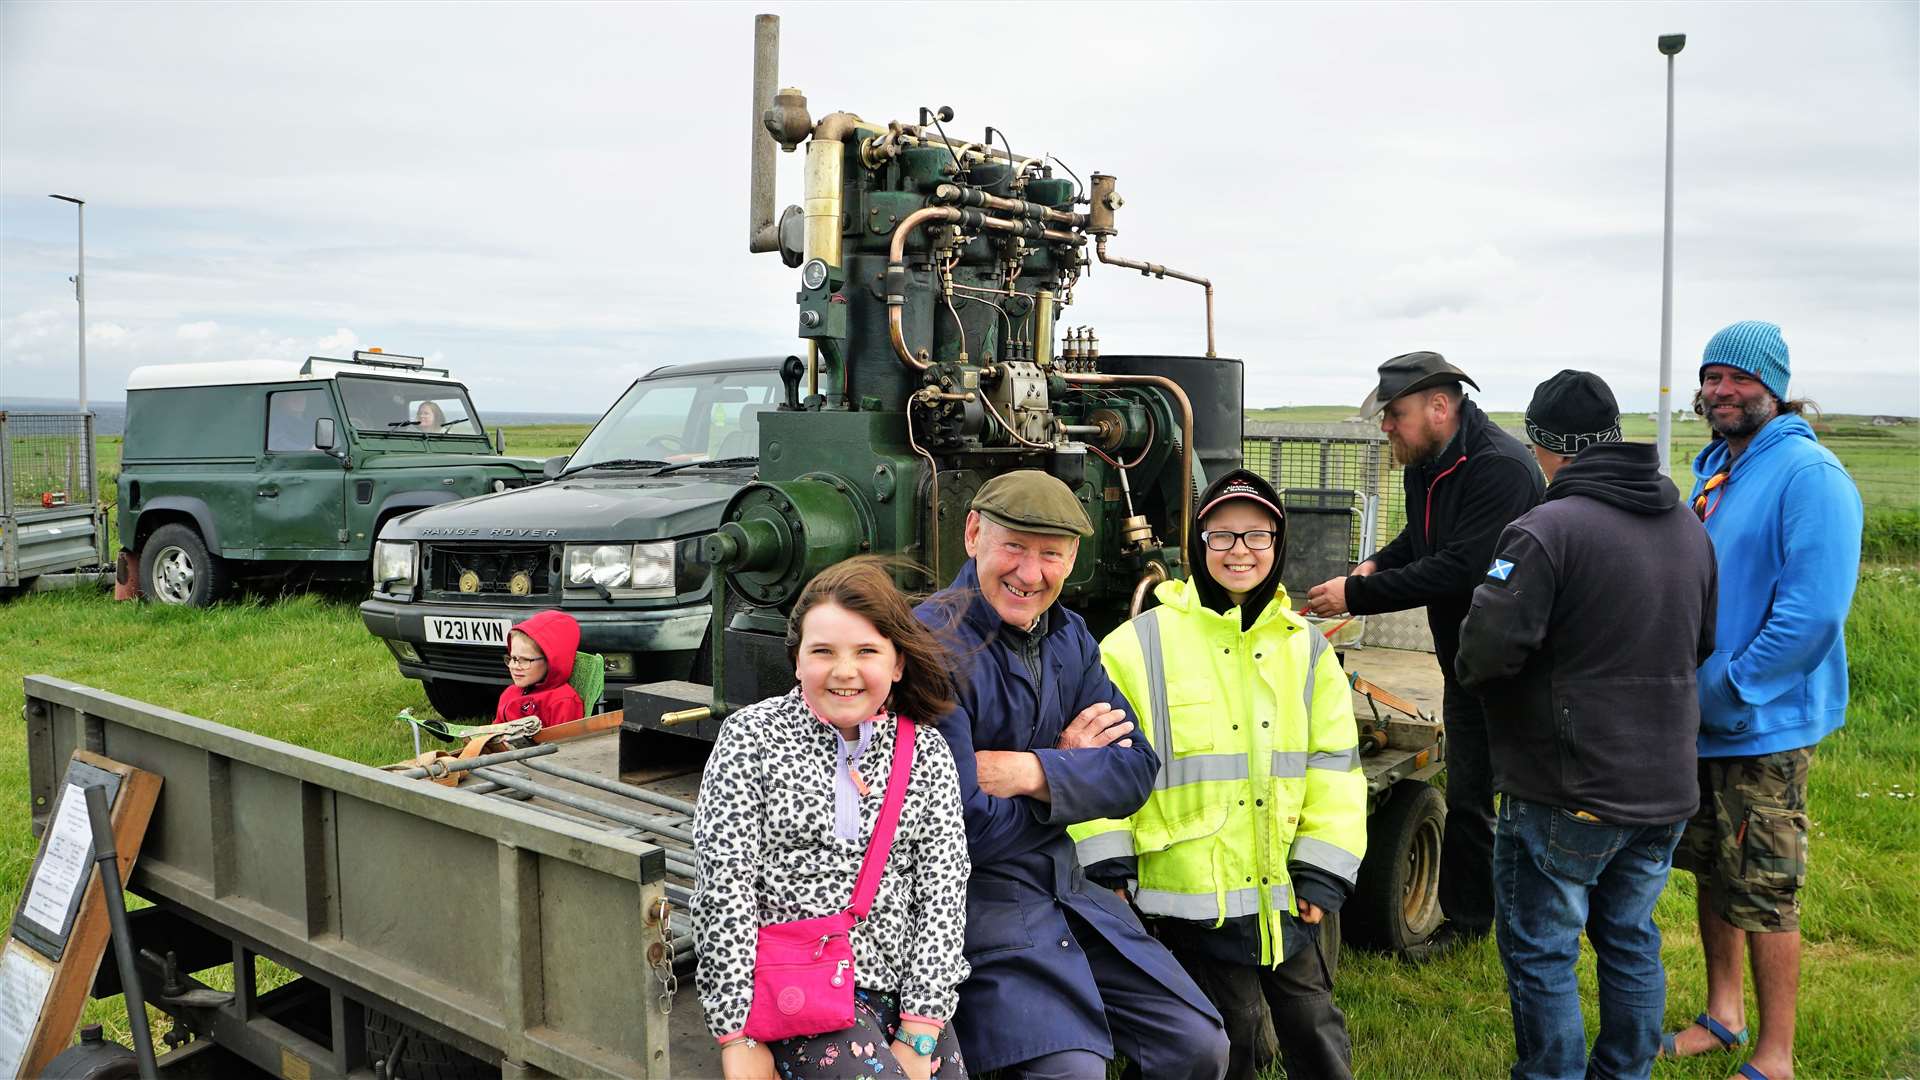 This 1945 Kelvin K3 Stationary Engine was voted Best Overall Exhibit. It is owned by D and G Broughton from Brough and had previously been fitted within the Isabella Fortuna fishing vessel. David Broughton is pictured with his grandchildren Benjamin and Hannah. Picture: DGS